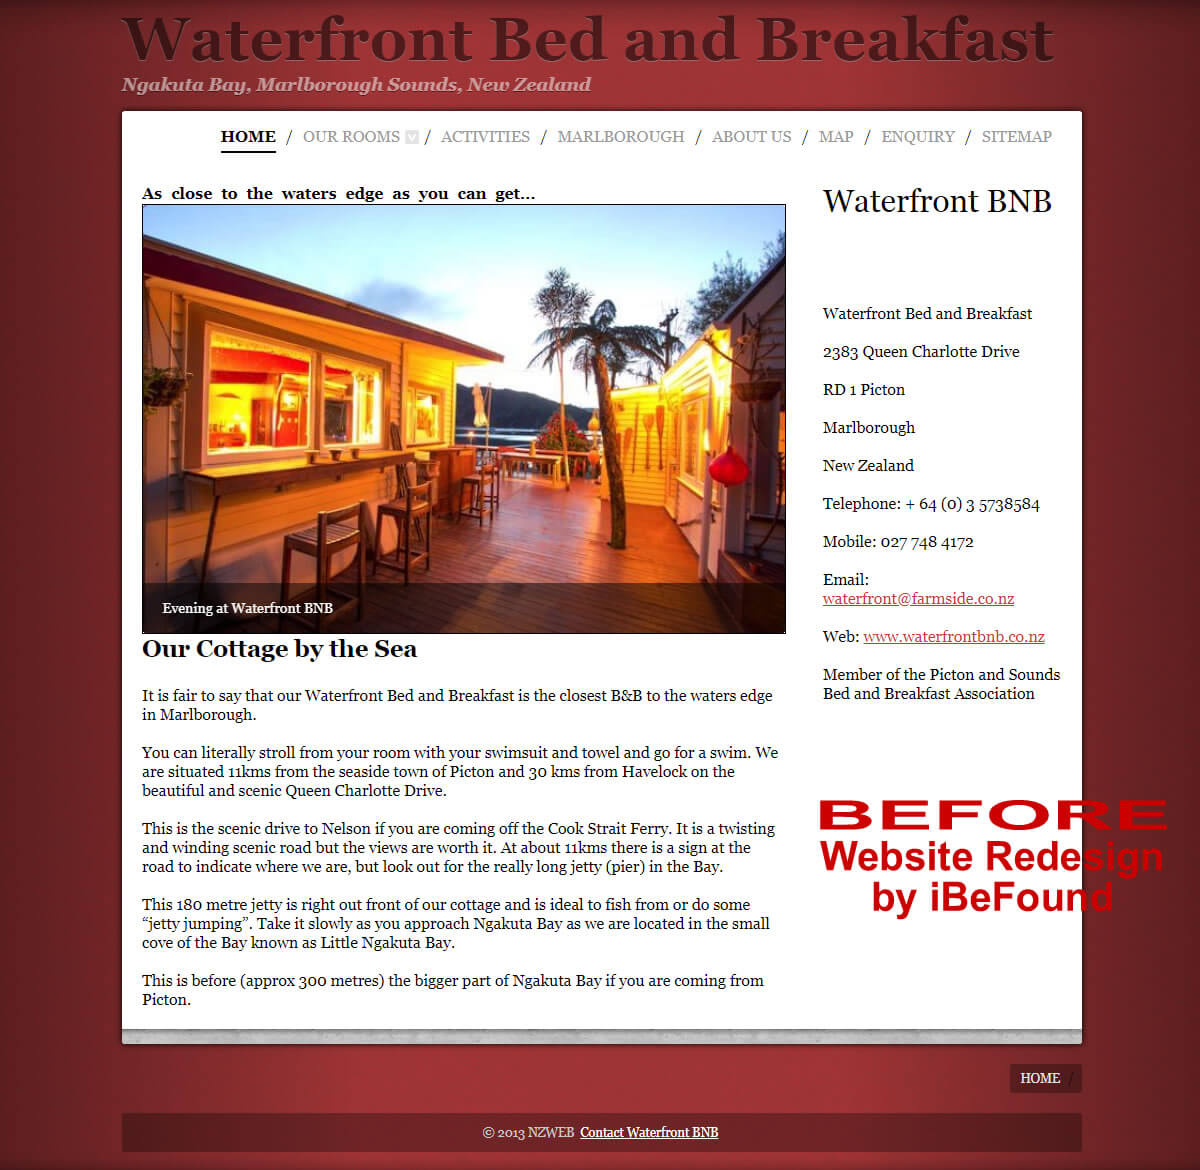 Homepage Of Waterfront Bed And Breakfast Before Website Redesign By IBeFound Digital Marketing Division